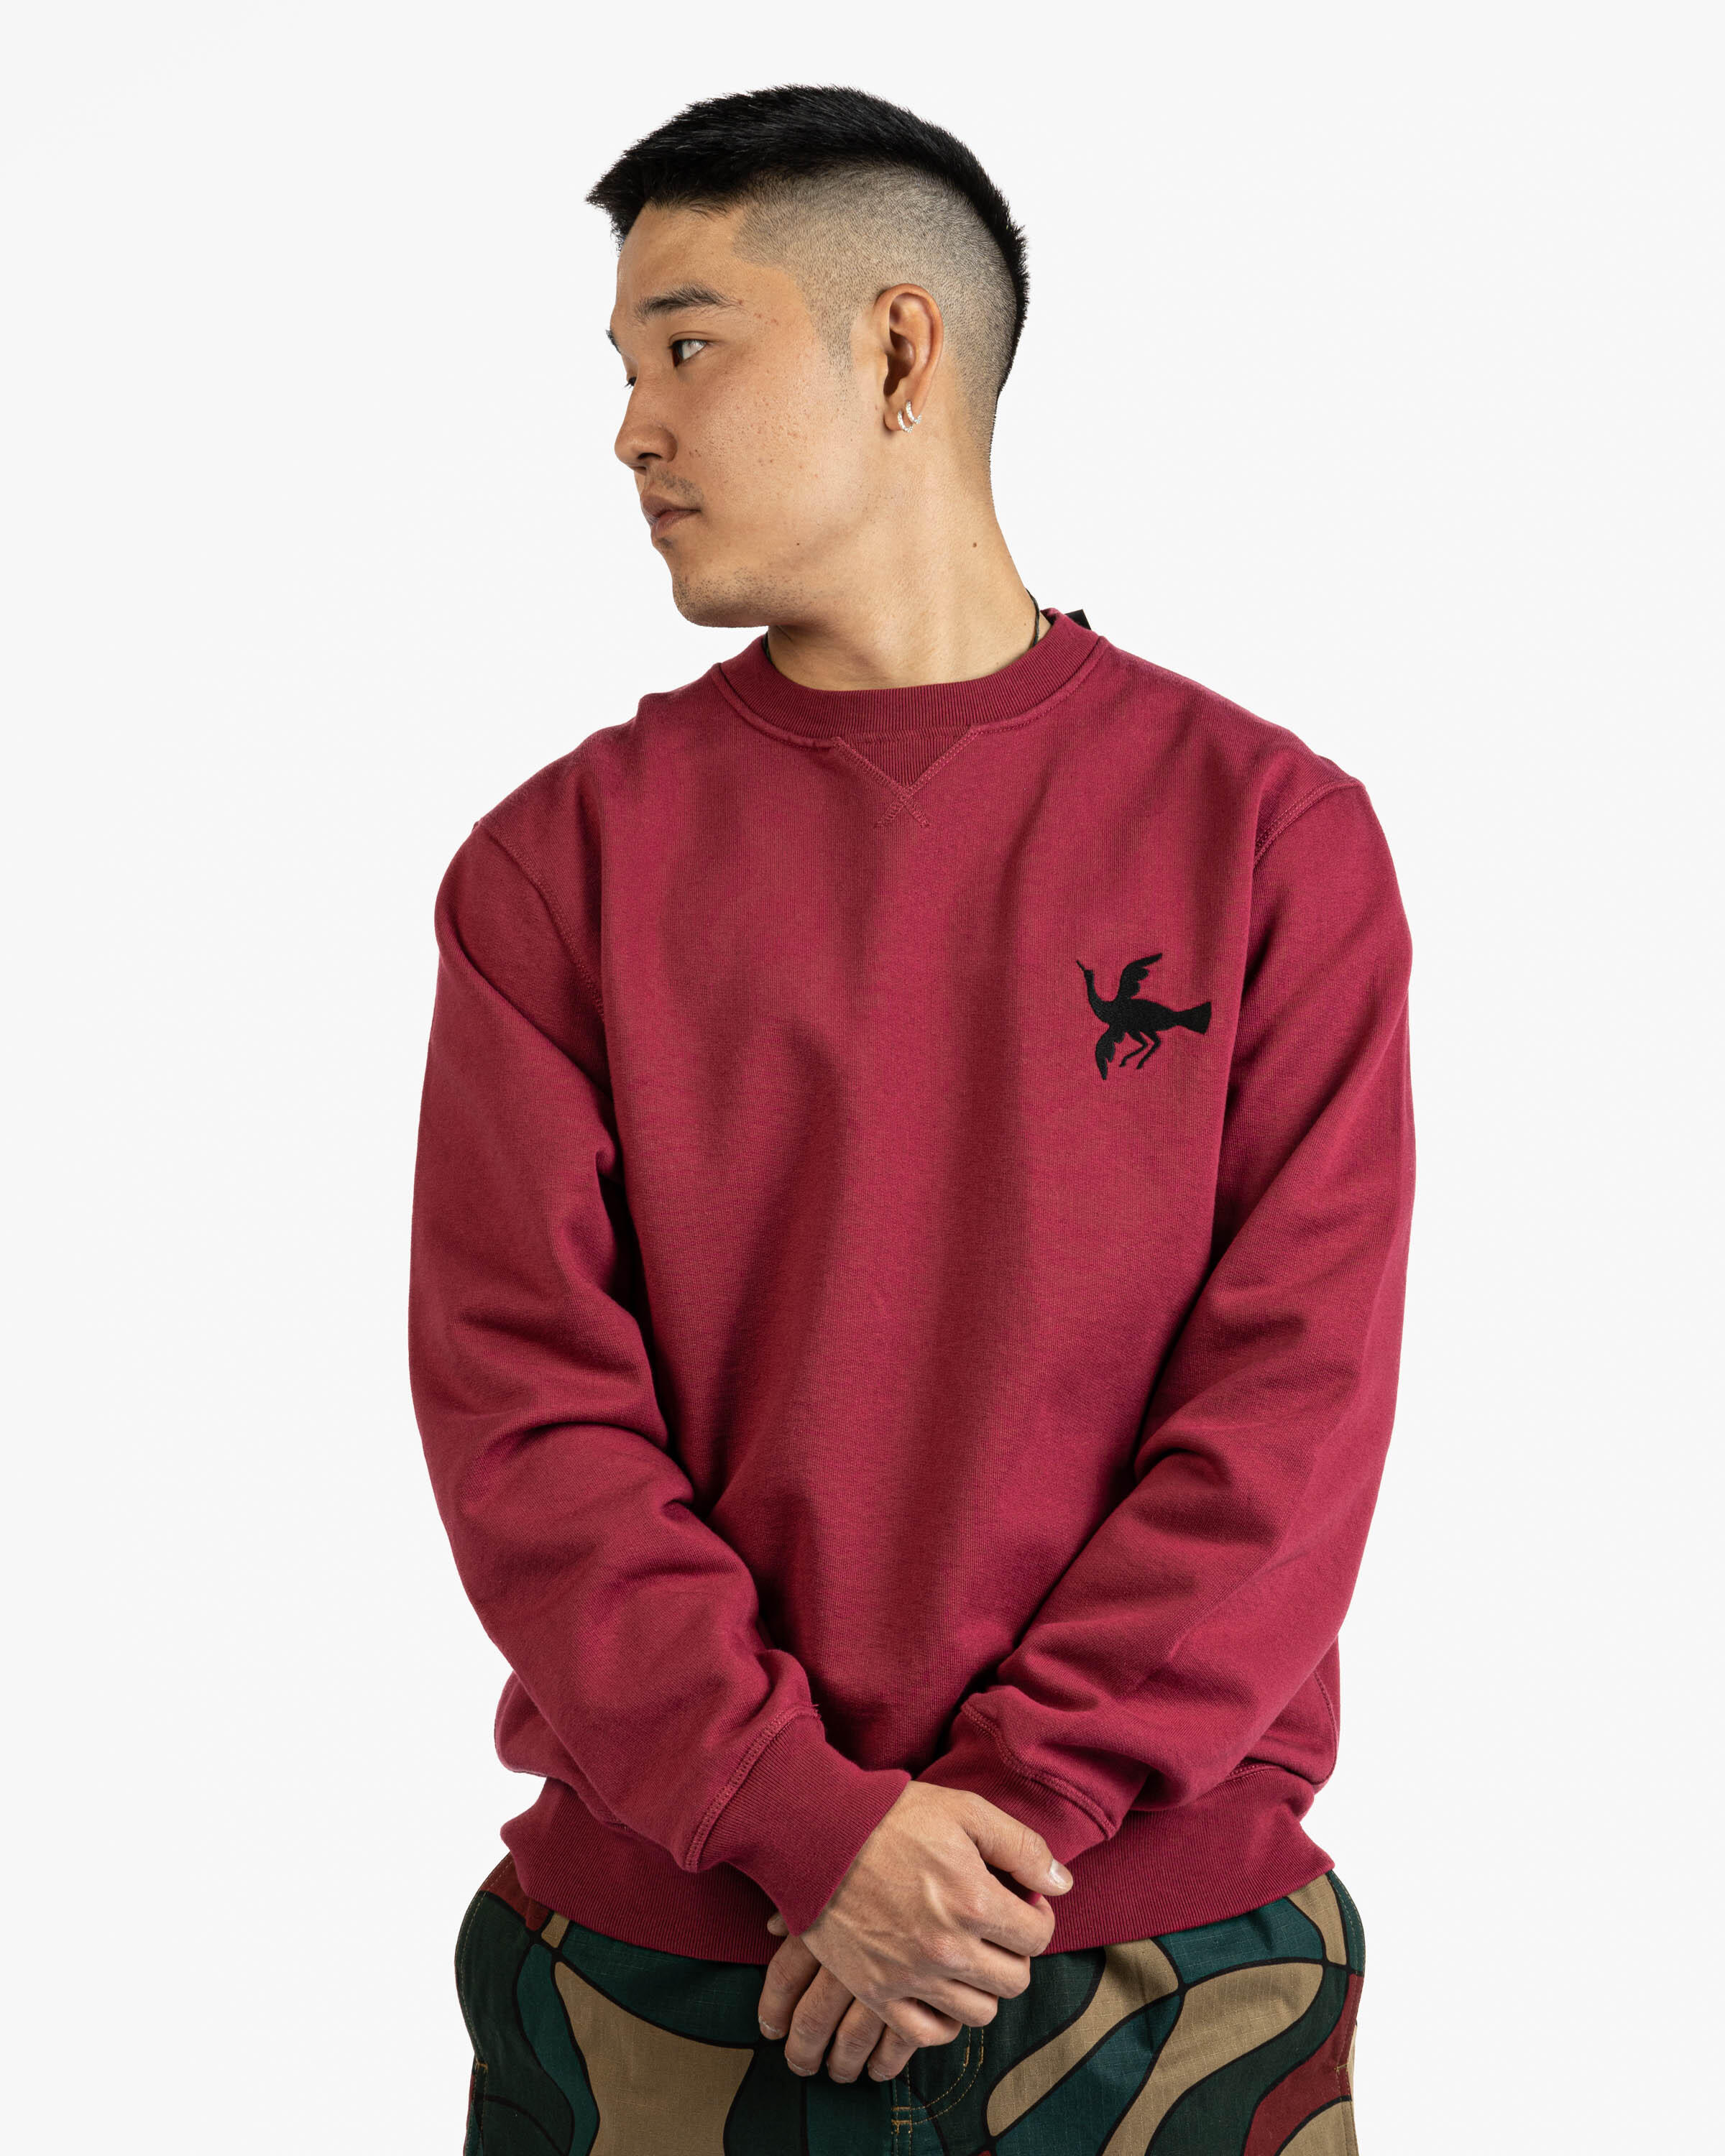 by Parra snaked by a horse crew neck sweatshirt